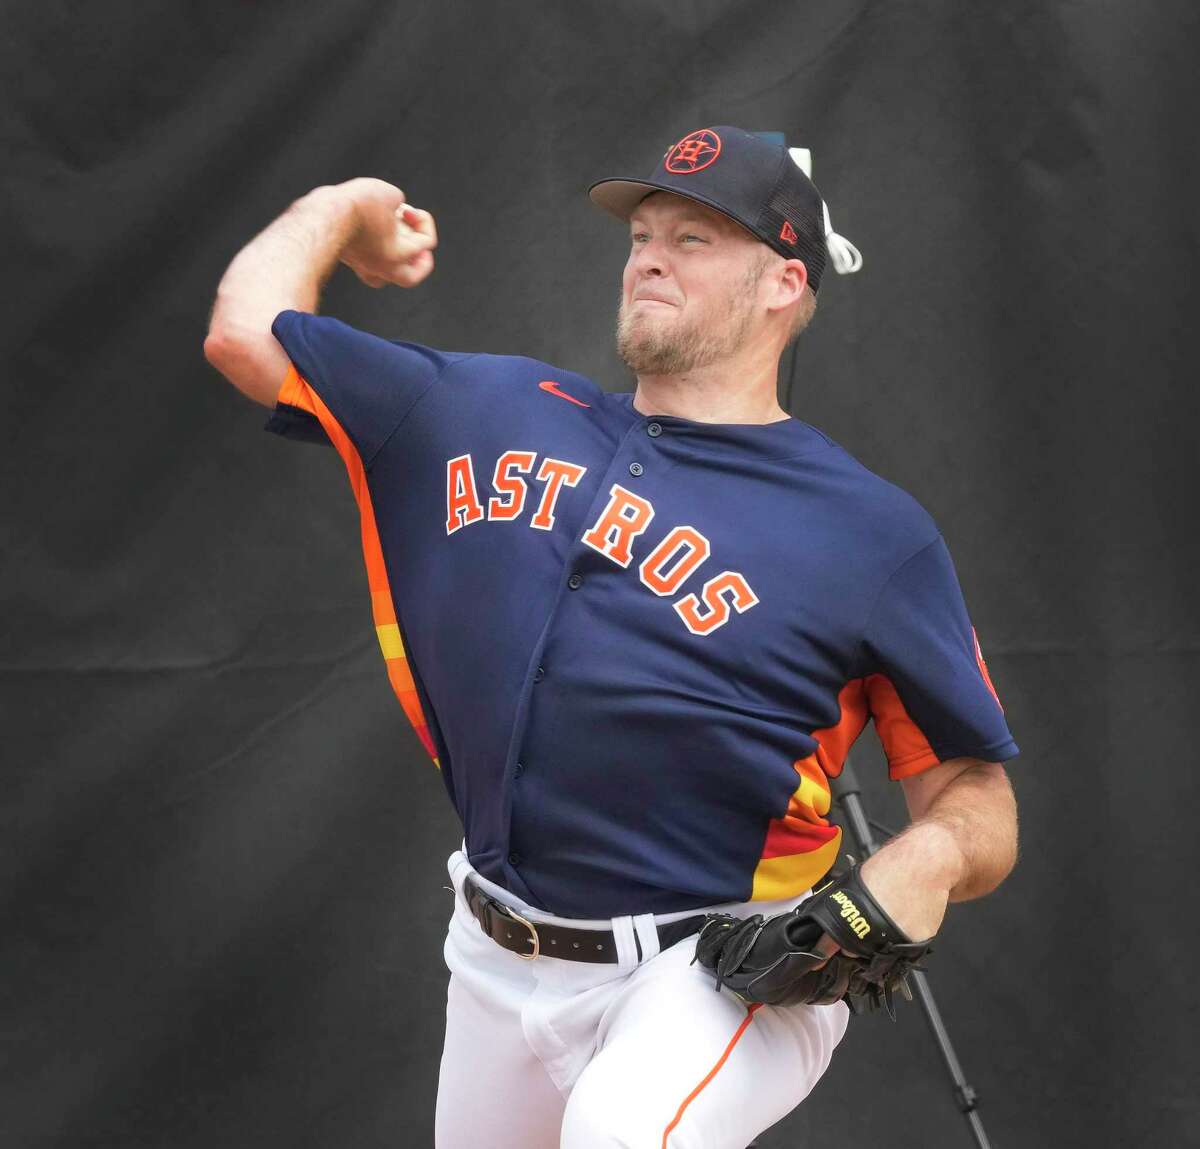 Houston Astros pitcher Ty Buttrey (51) pitches during workouts for pitchers and catchers at the Astros spring training complex at The Ballpark of the Palm Beaches on Friday, Feb. 17, 2023 in West Palm Beach .